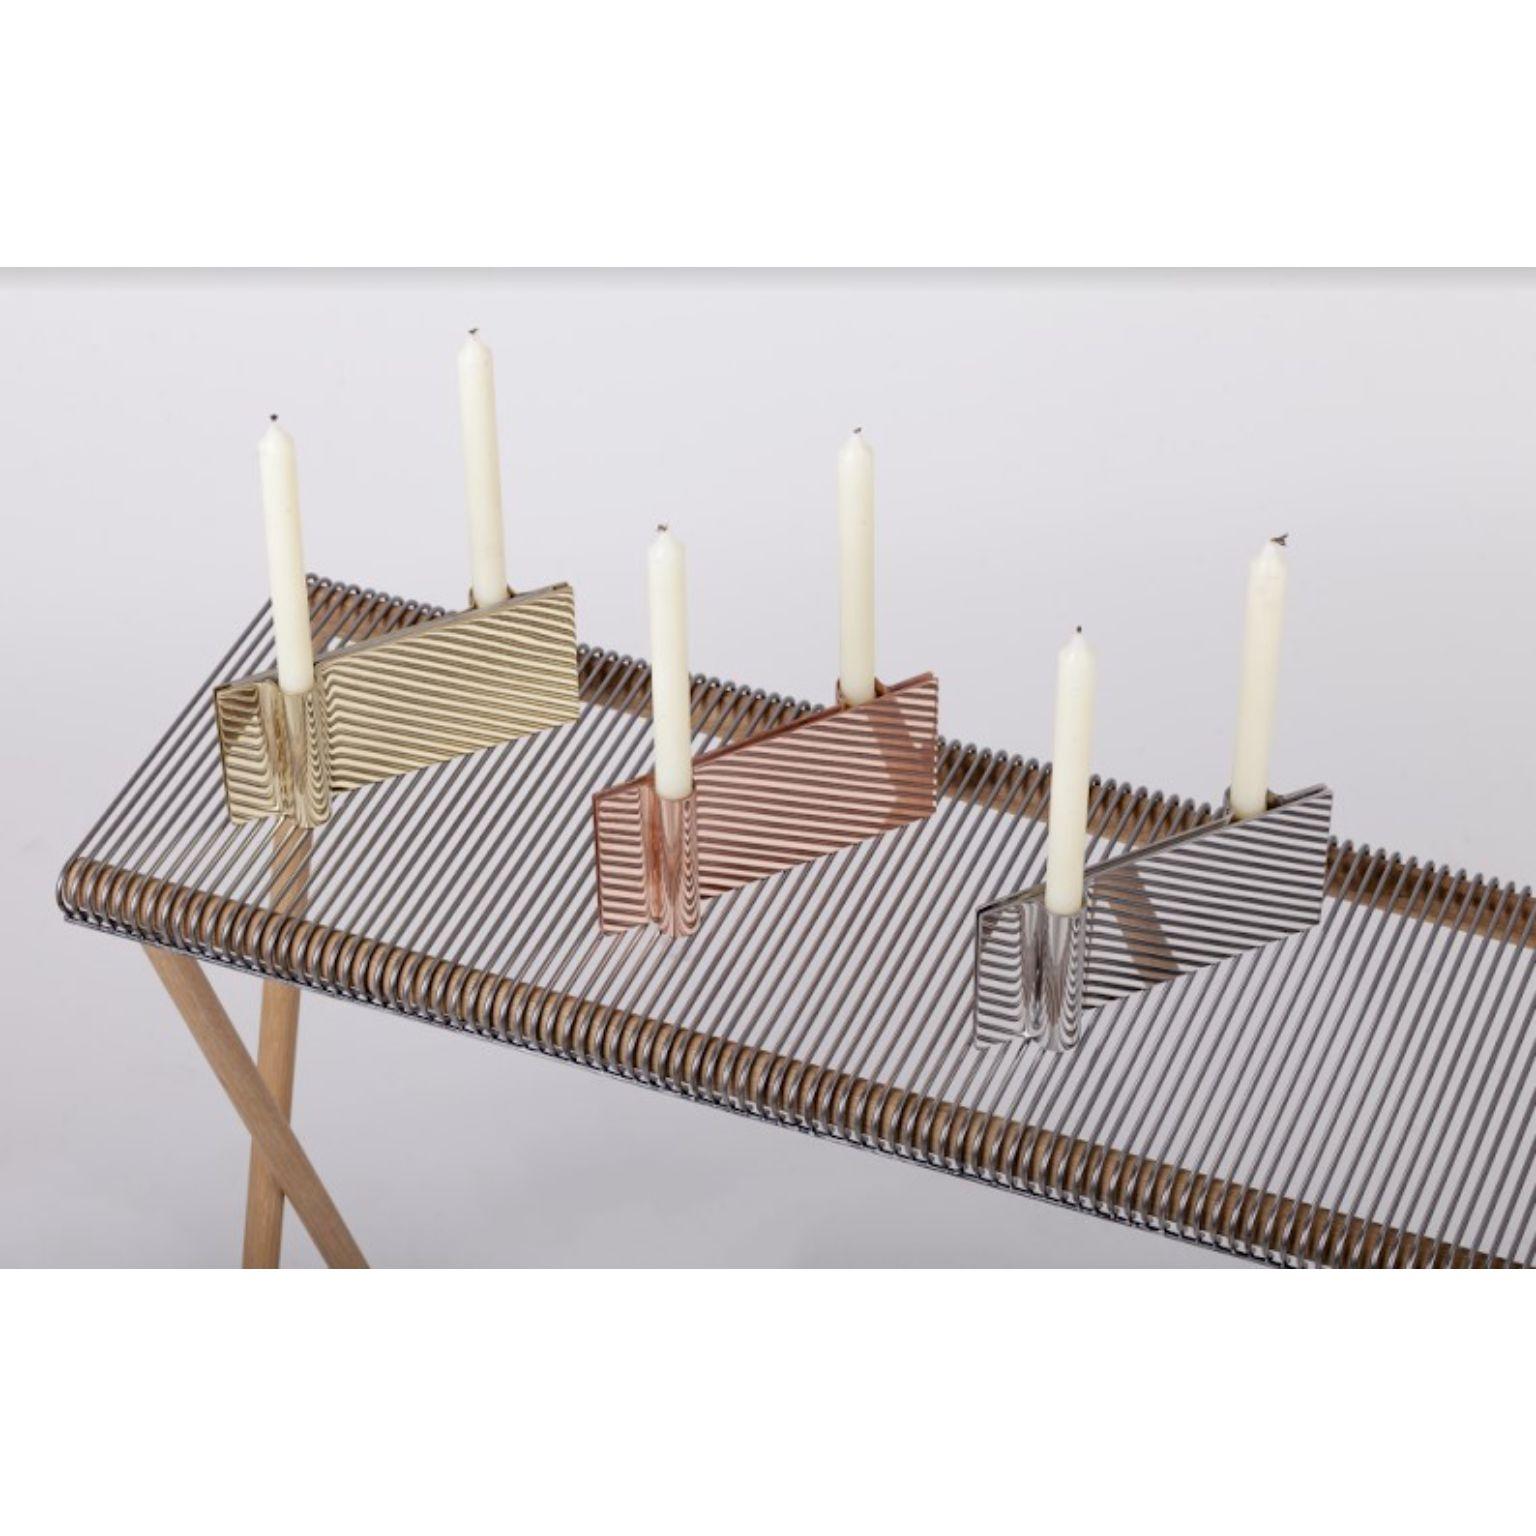 Brass Set of 3 Folio Candle Holders by Mingardo For Sale